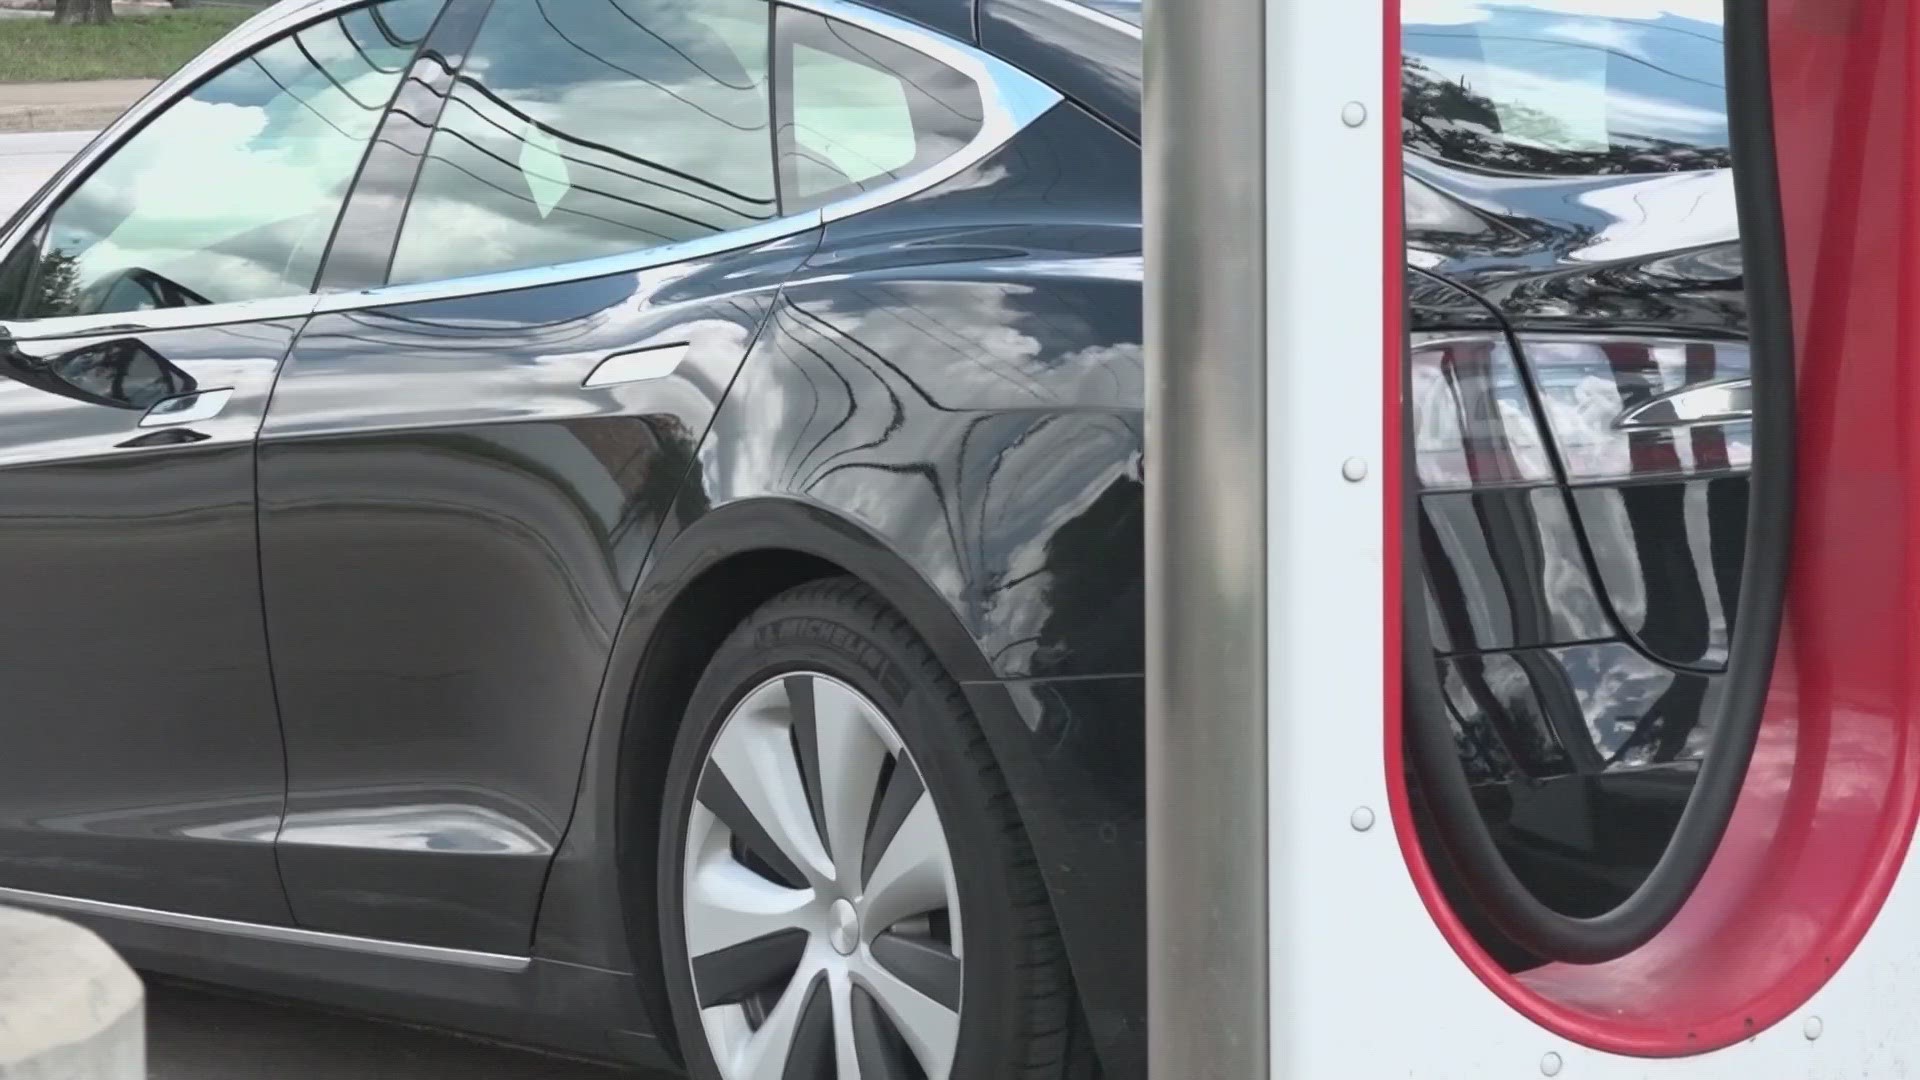 Senate Bill 505 requires electric vehicle owners to pay $400 to register a new electric vehicle, on top of other fees. Renewing registration will cost $200.